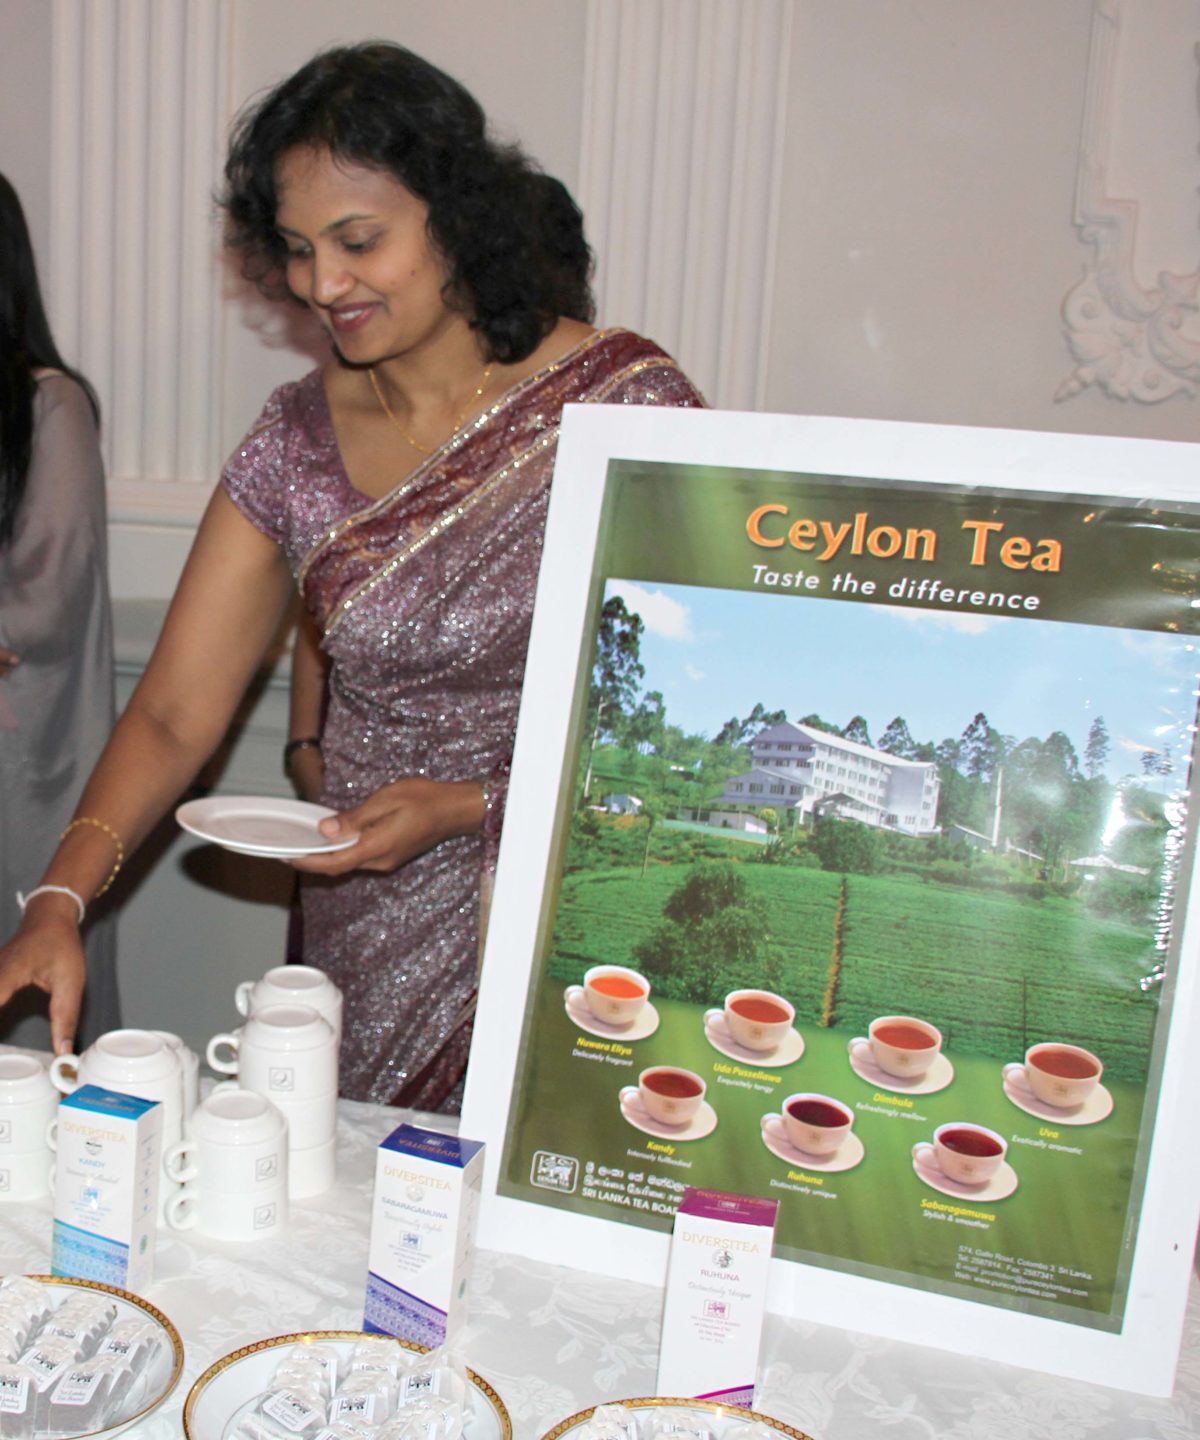 Toronto was among the cities that hosted the Global Tea Party to mark 150th anniversary of Ceylon Tea.